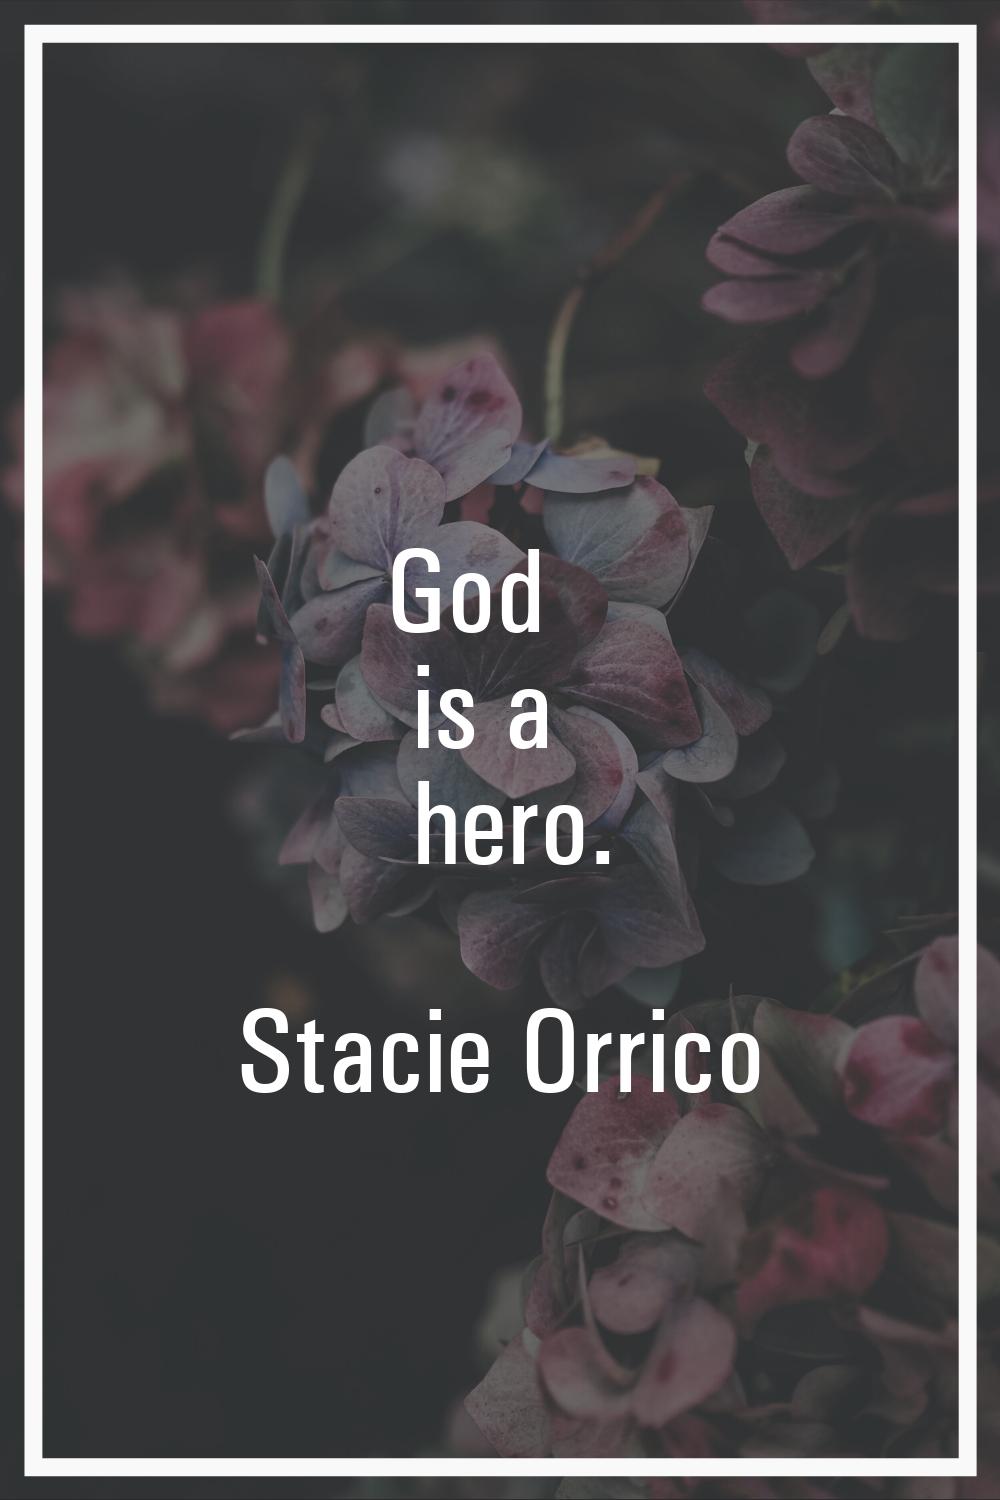 God is a hero.